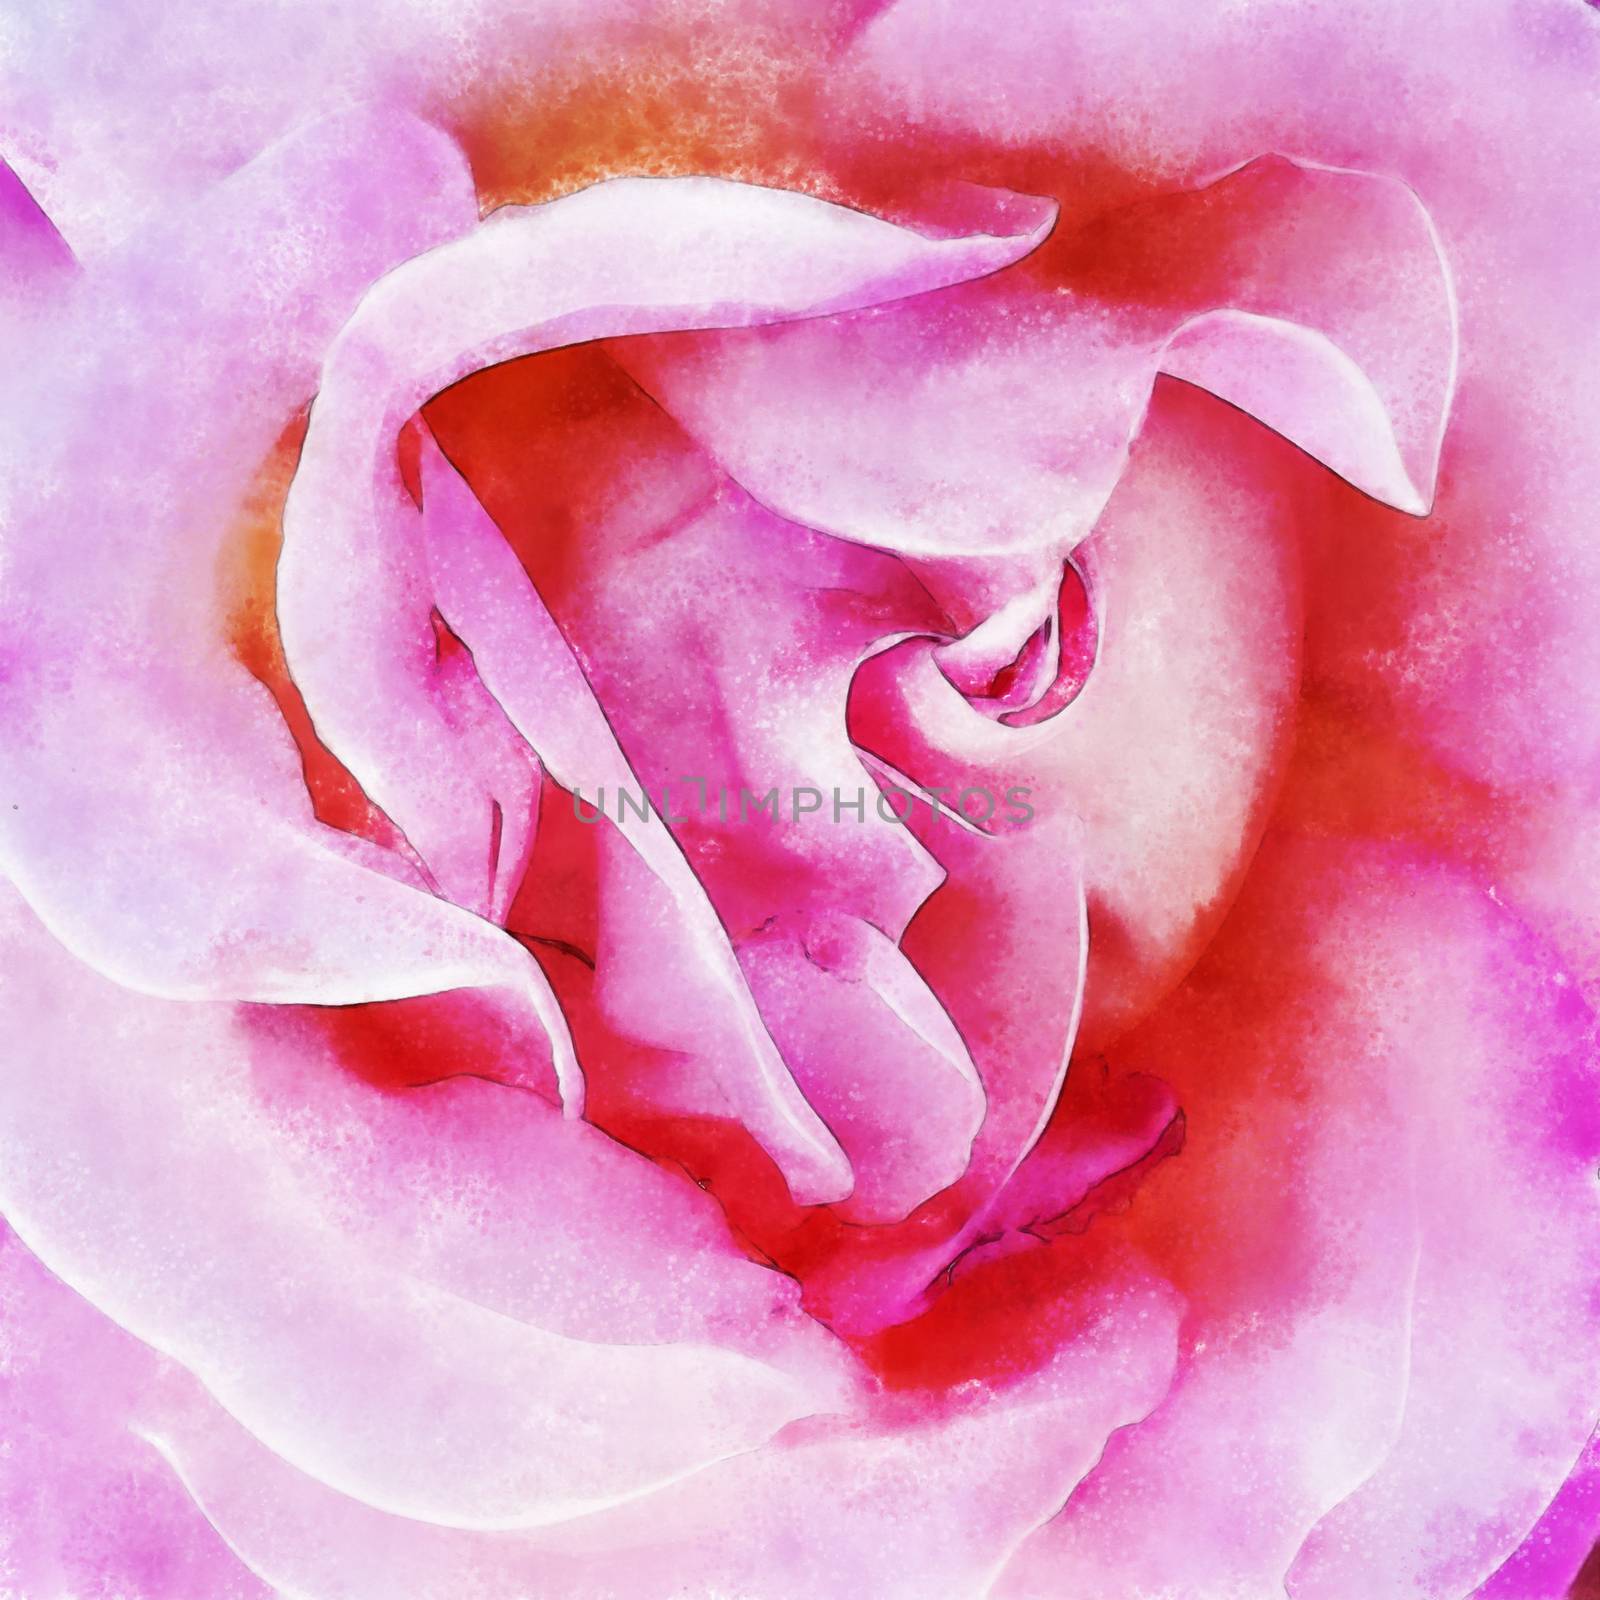 Closeup pink rose fine art, digital painting created by hand using several techniques to resemble watercolor on paper.